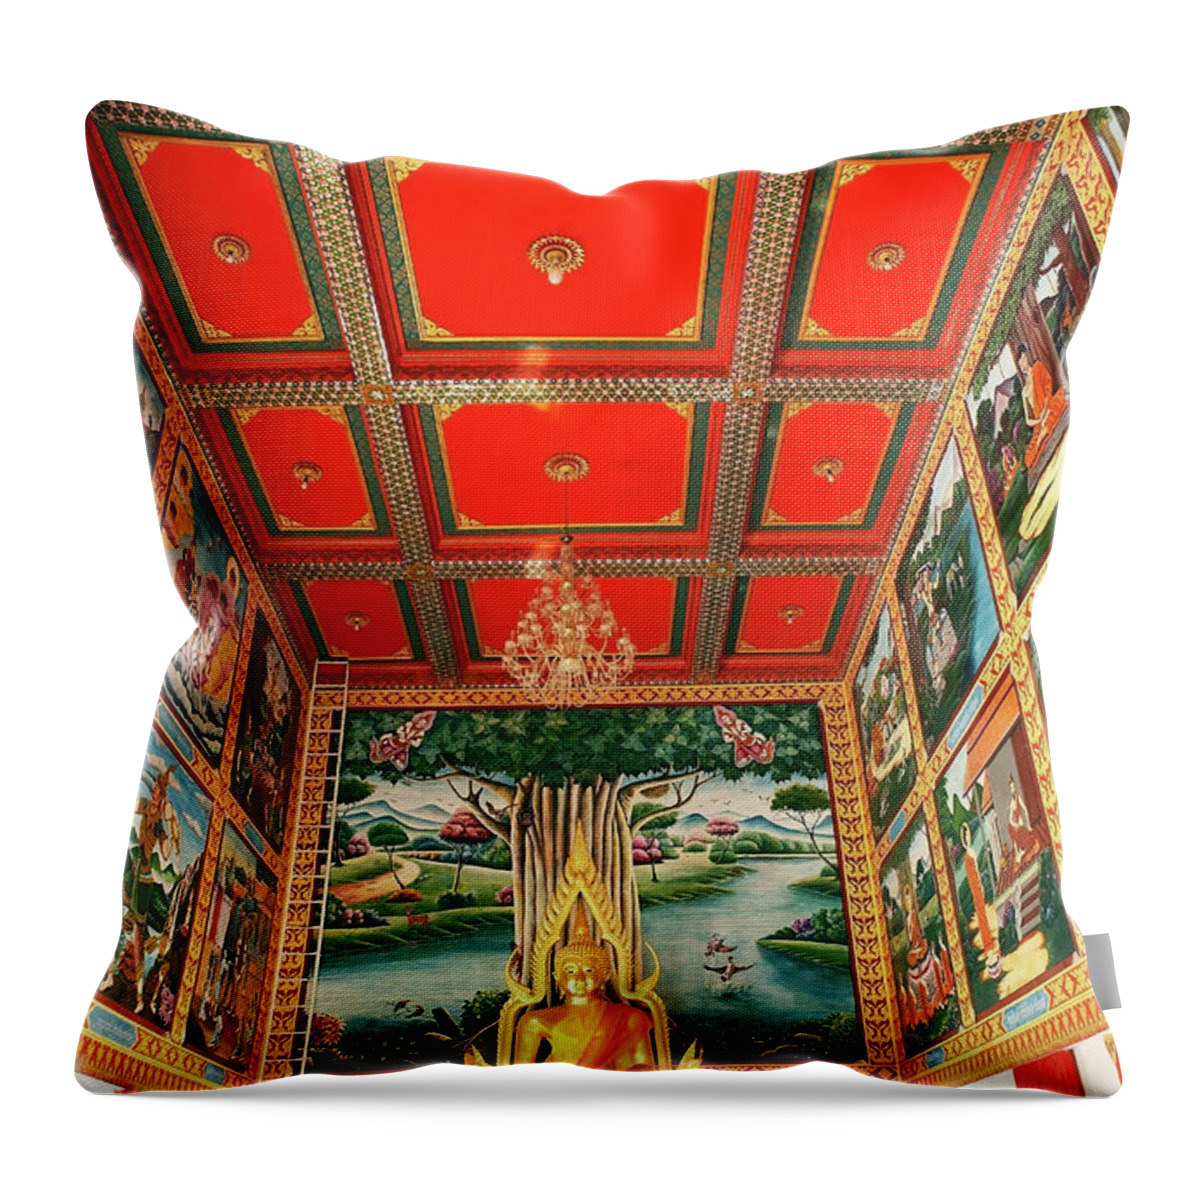 Thailand Throw Pillow featuring the photograph Thailand, Hua Hin, Interior Of Wat Khao by Wilfried Krecichwost